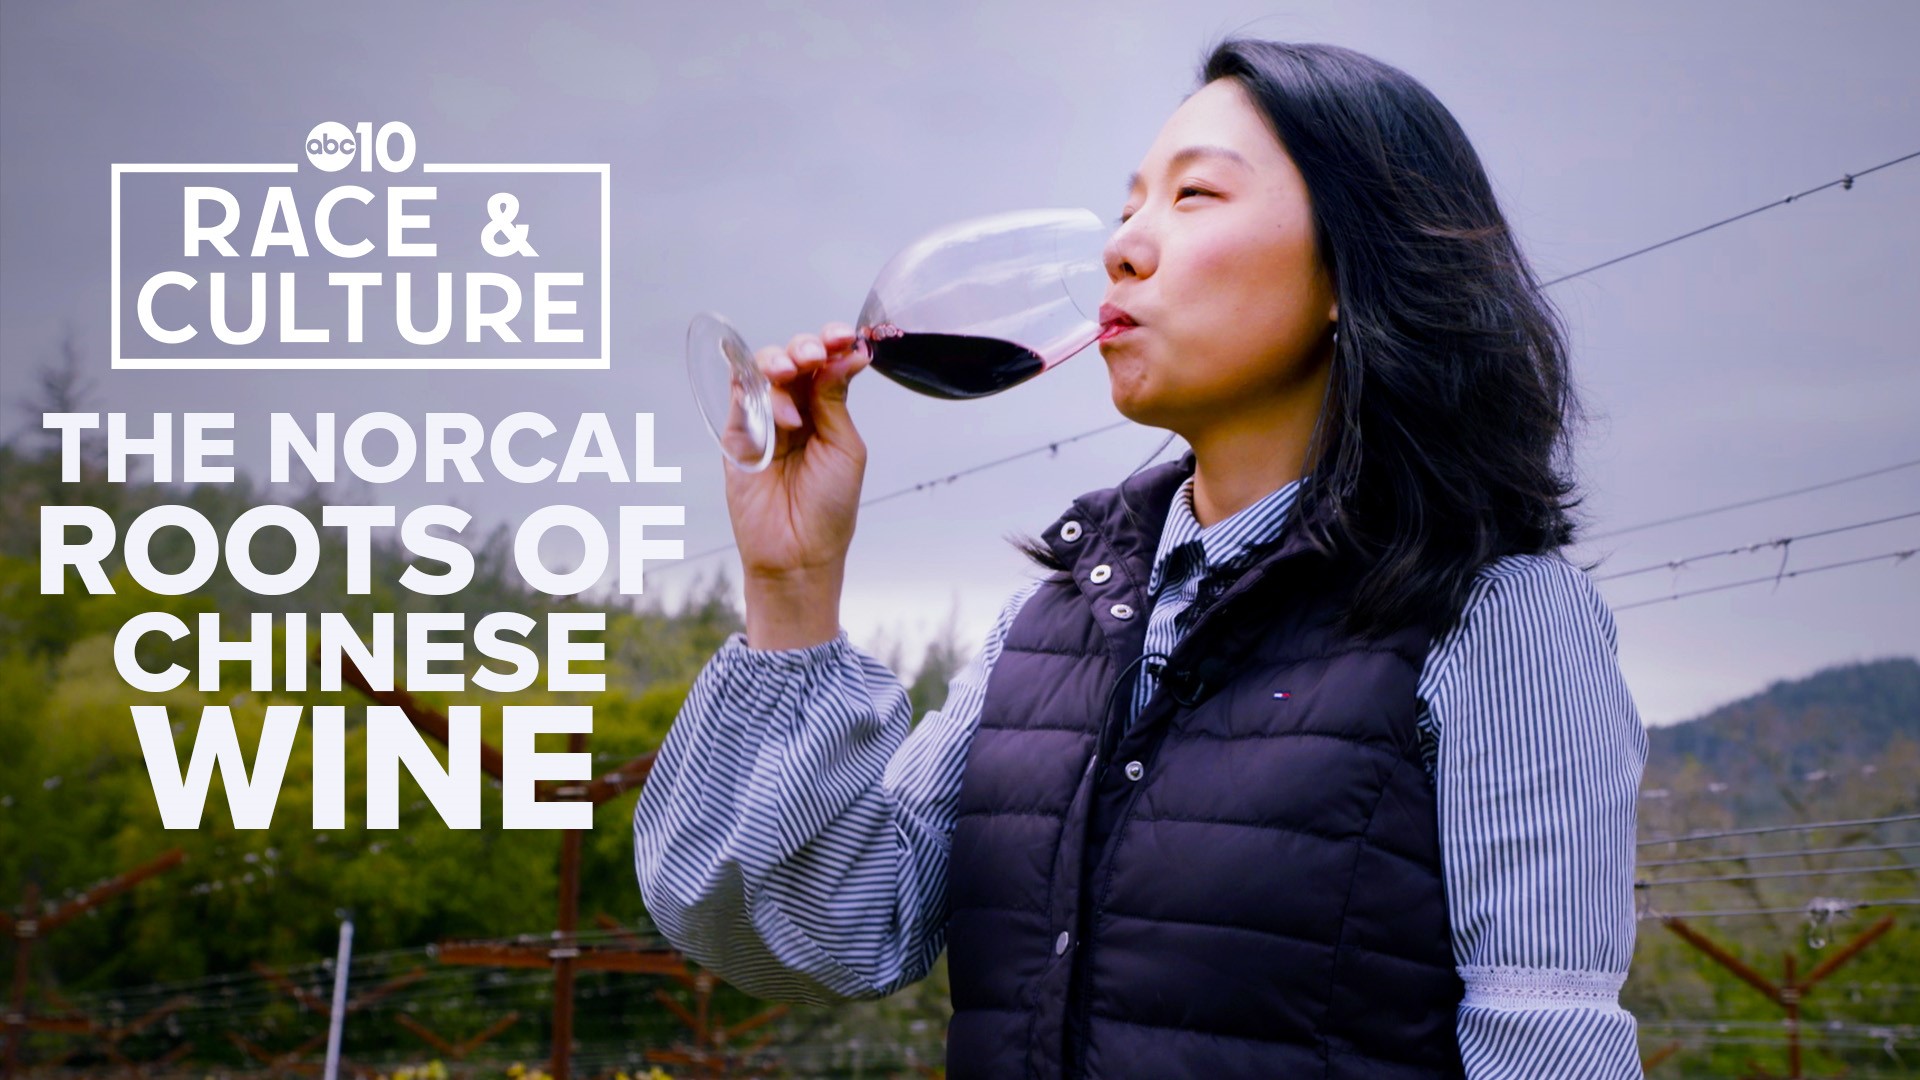 During a world-changing toast, Napa Valley wine helped mend relations between the U.S. and China. It also launched a new Chinese winemaking industry.